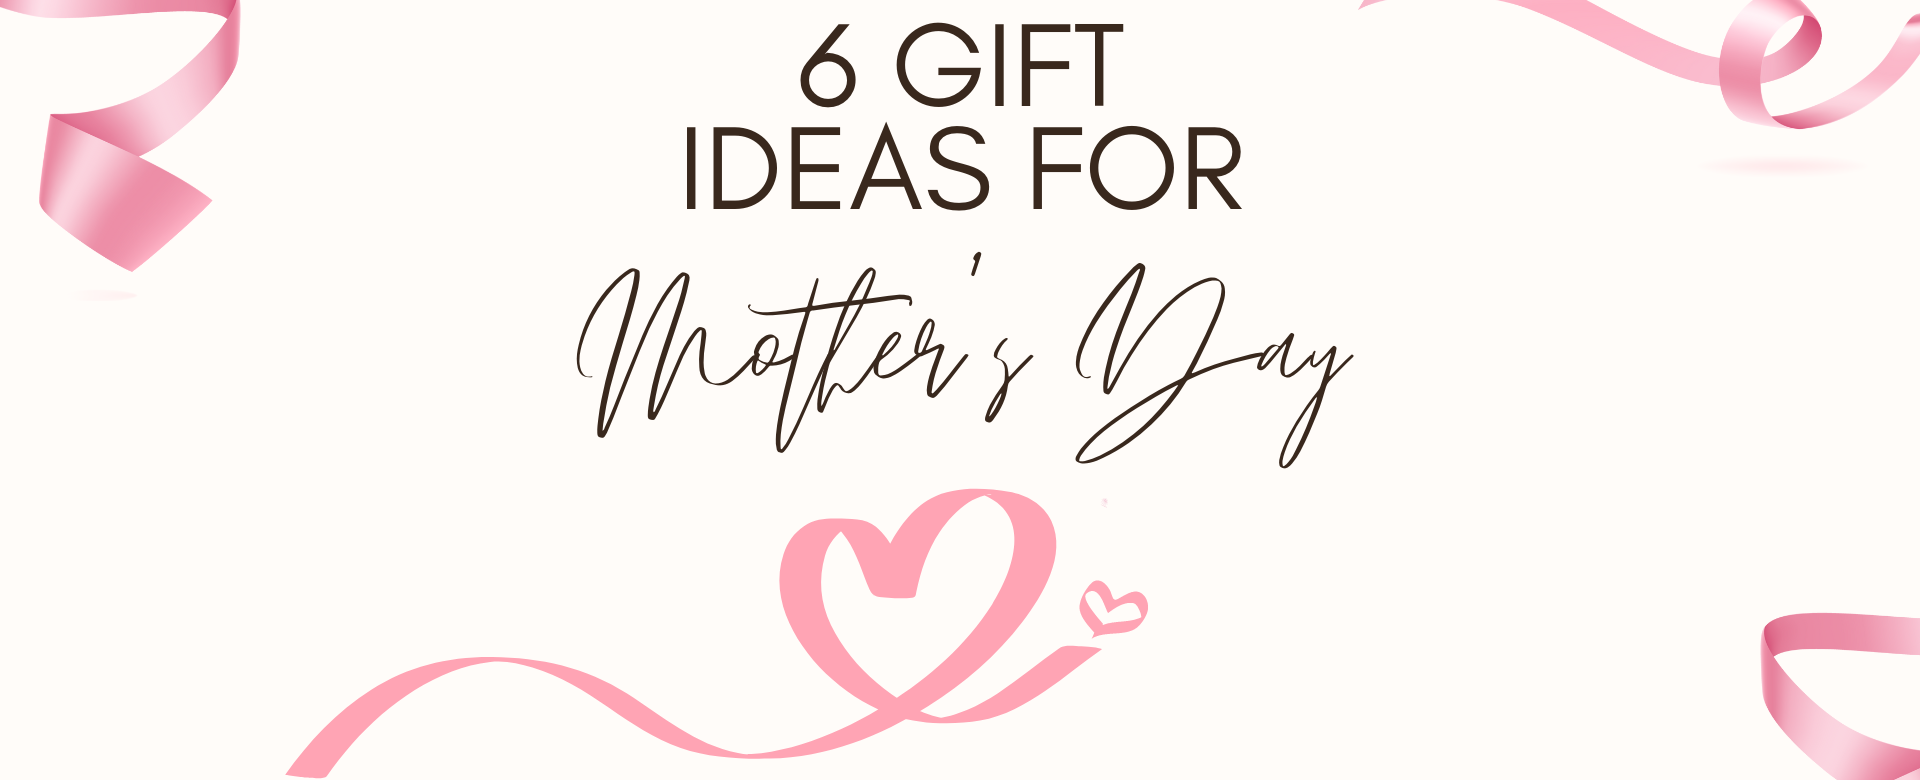 Mother's day Gift Ideas - The Caroline K. Huo Group